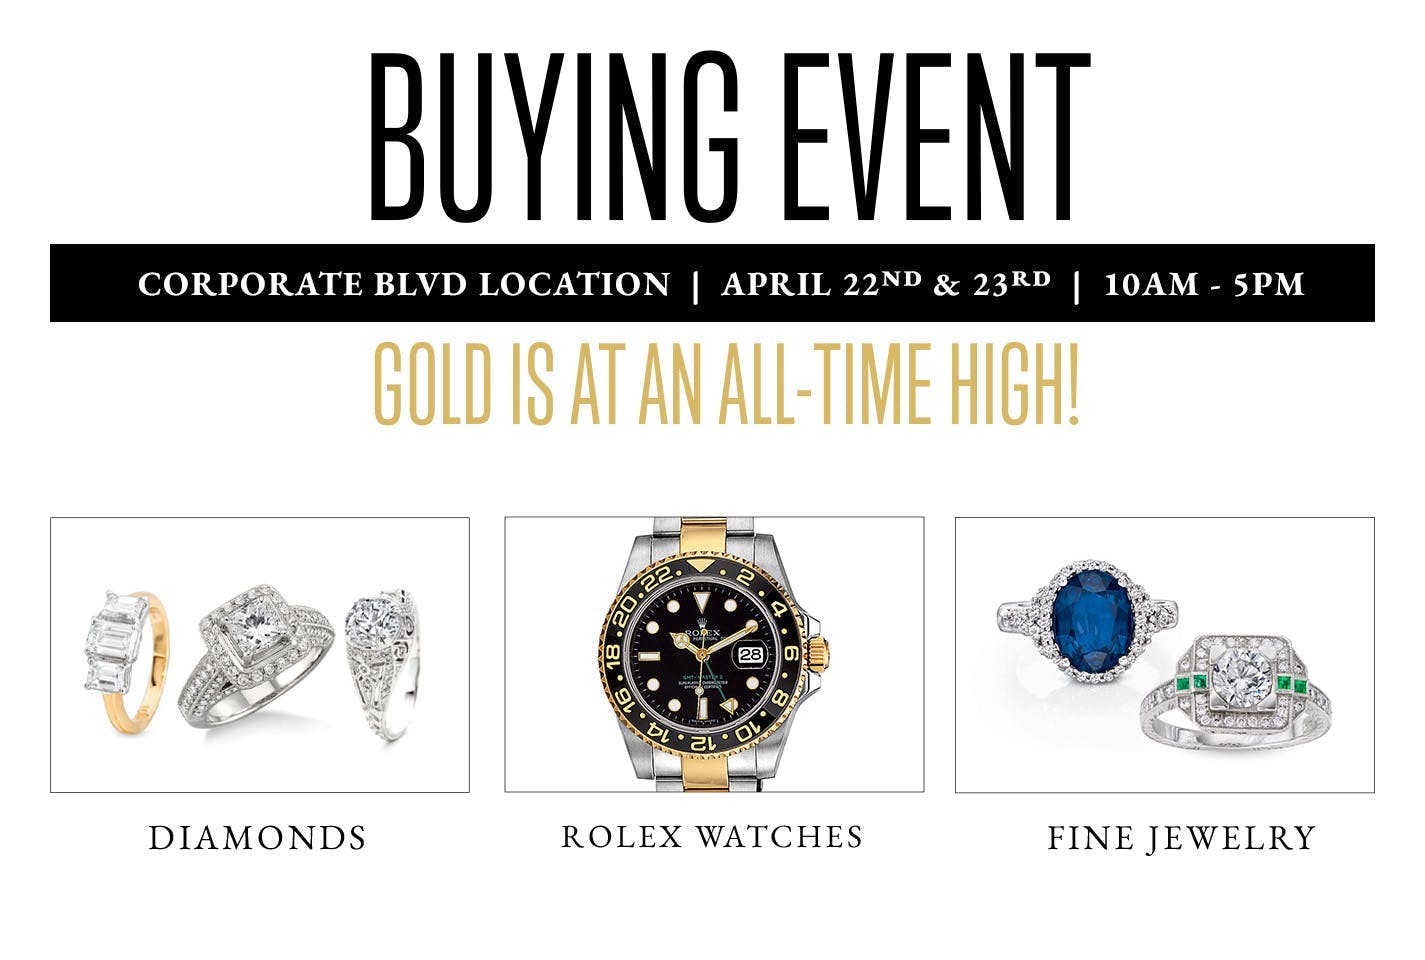 Promo image for a gold buying event in Baton Rouge